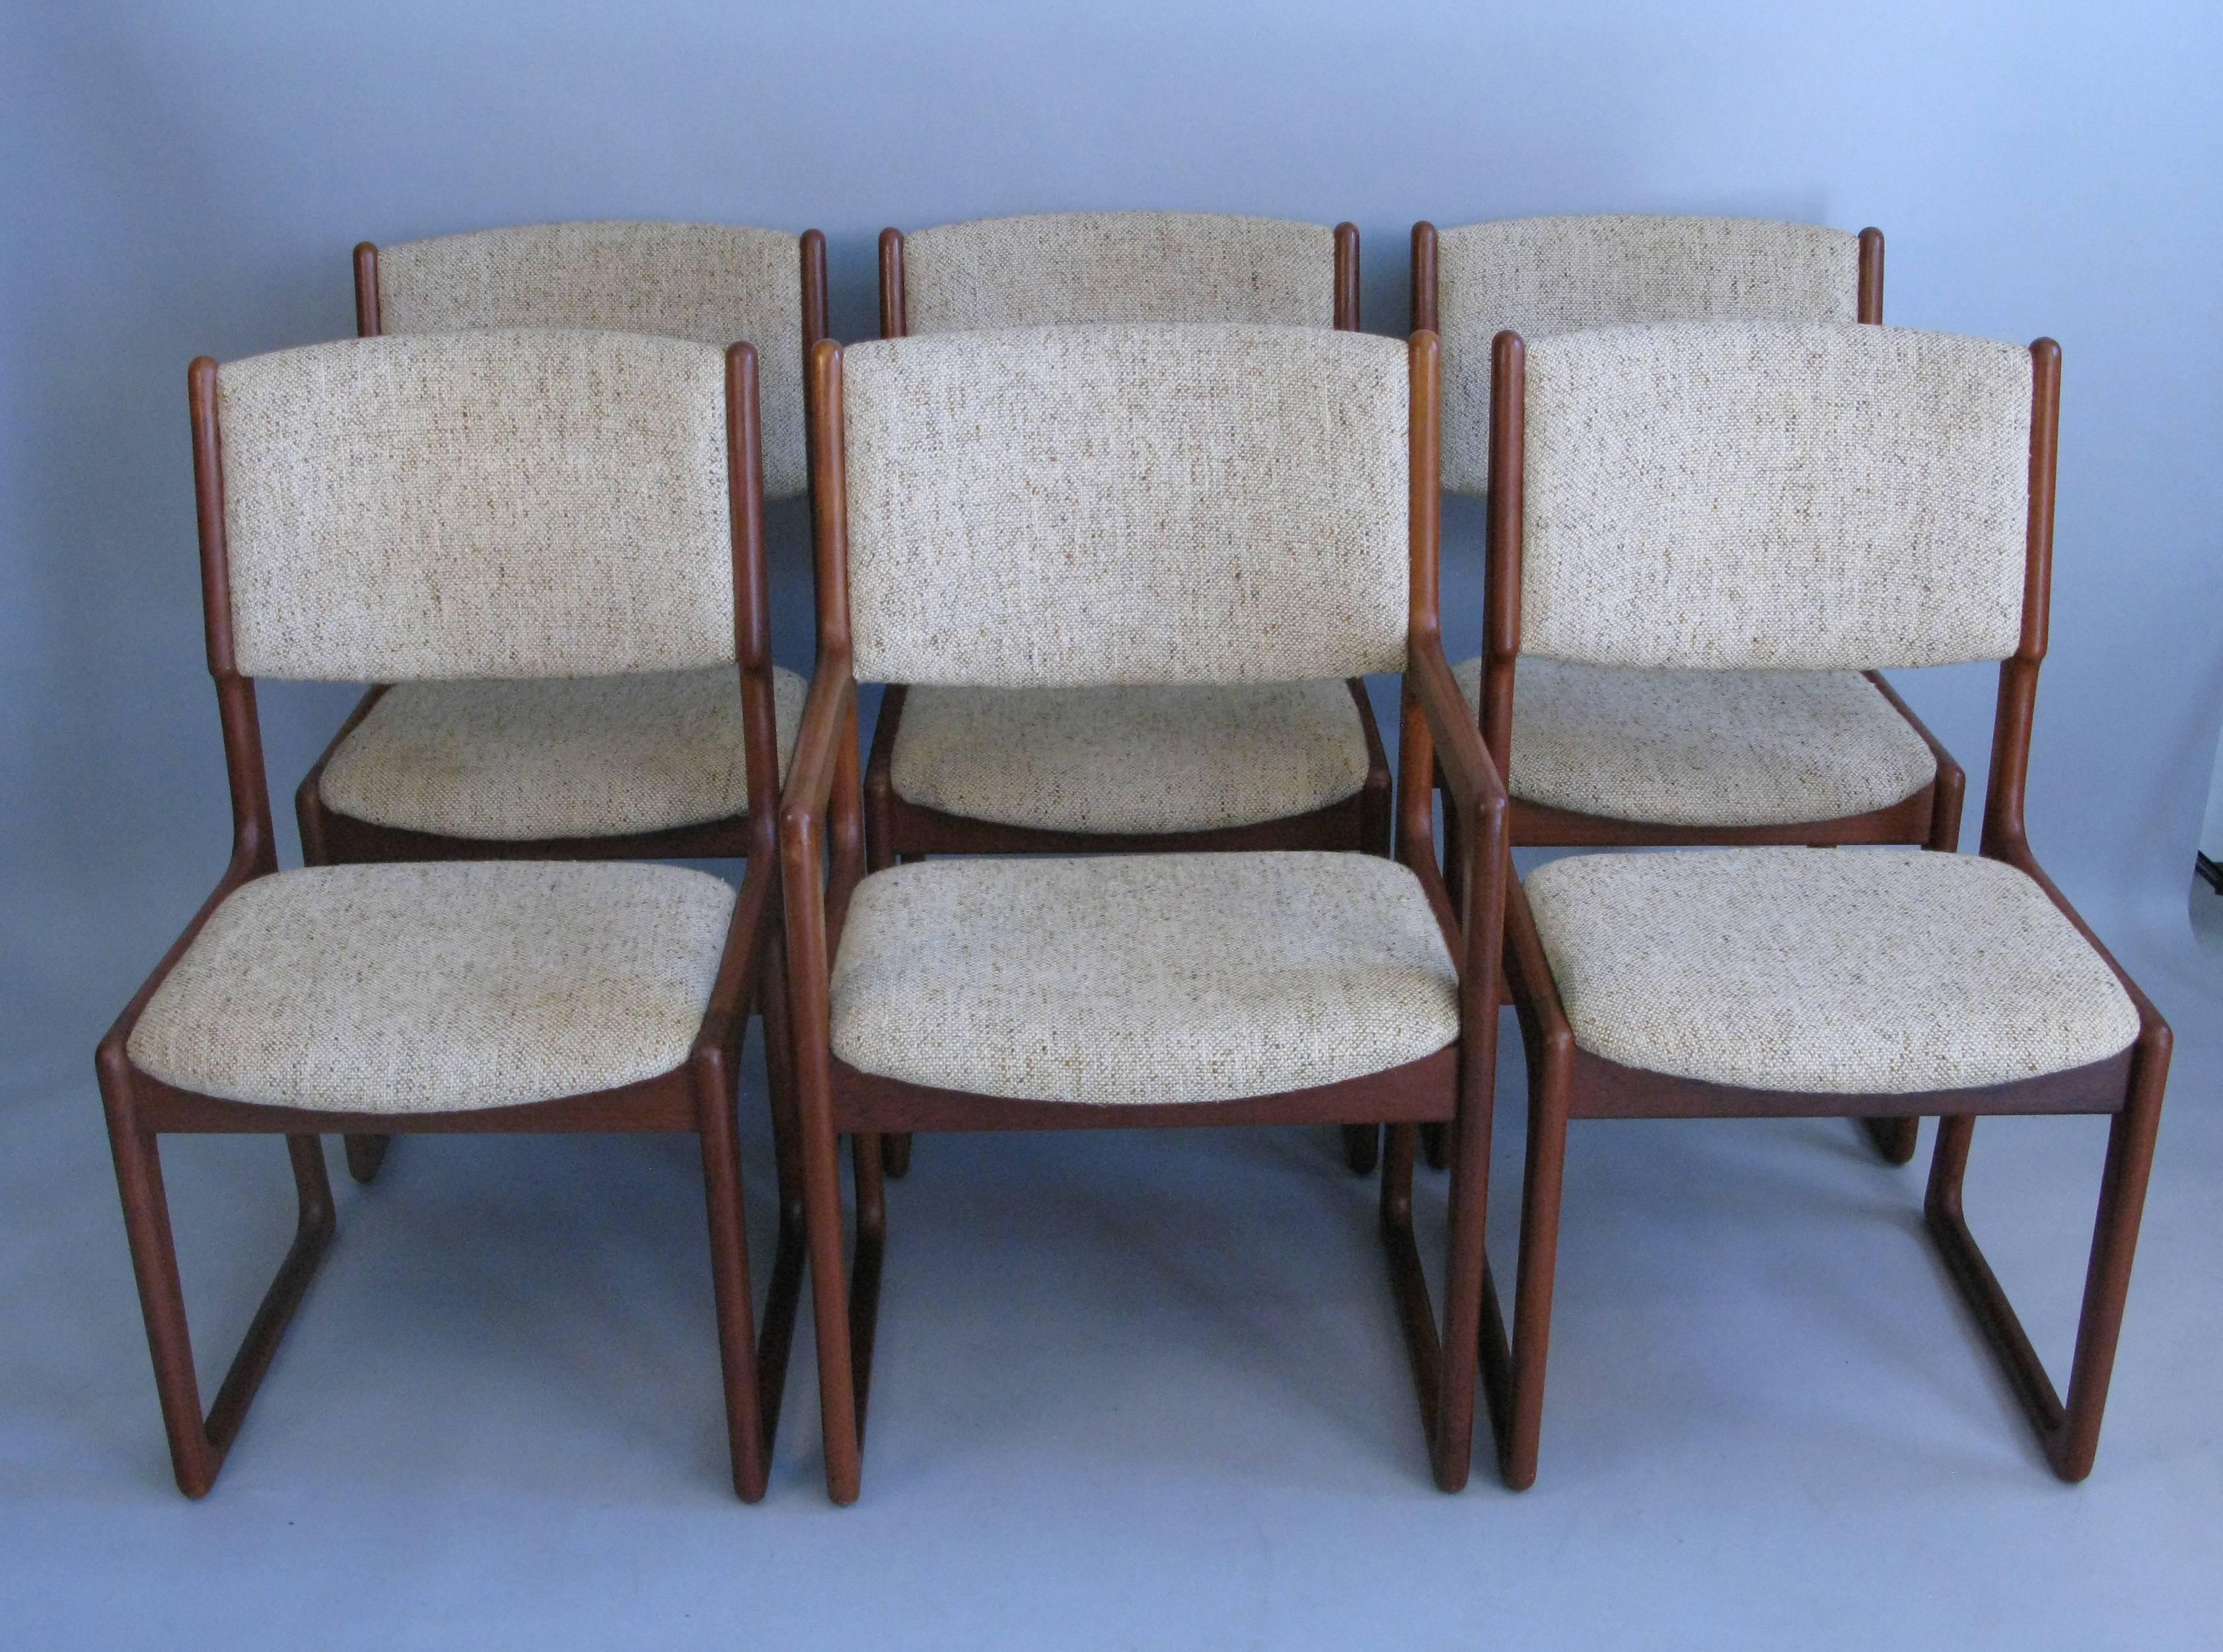 A great set of six teak Danish design dining chairs by Benny Linden Design from the 1960s. The chair have very nice lines and solid joined construction. They are in their original fabric which is in very good condition. The chairs consist of five